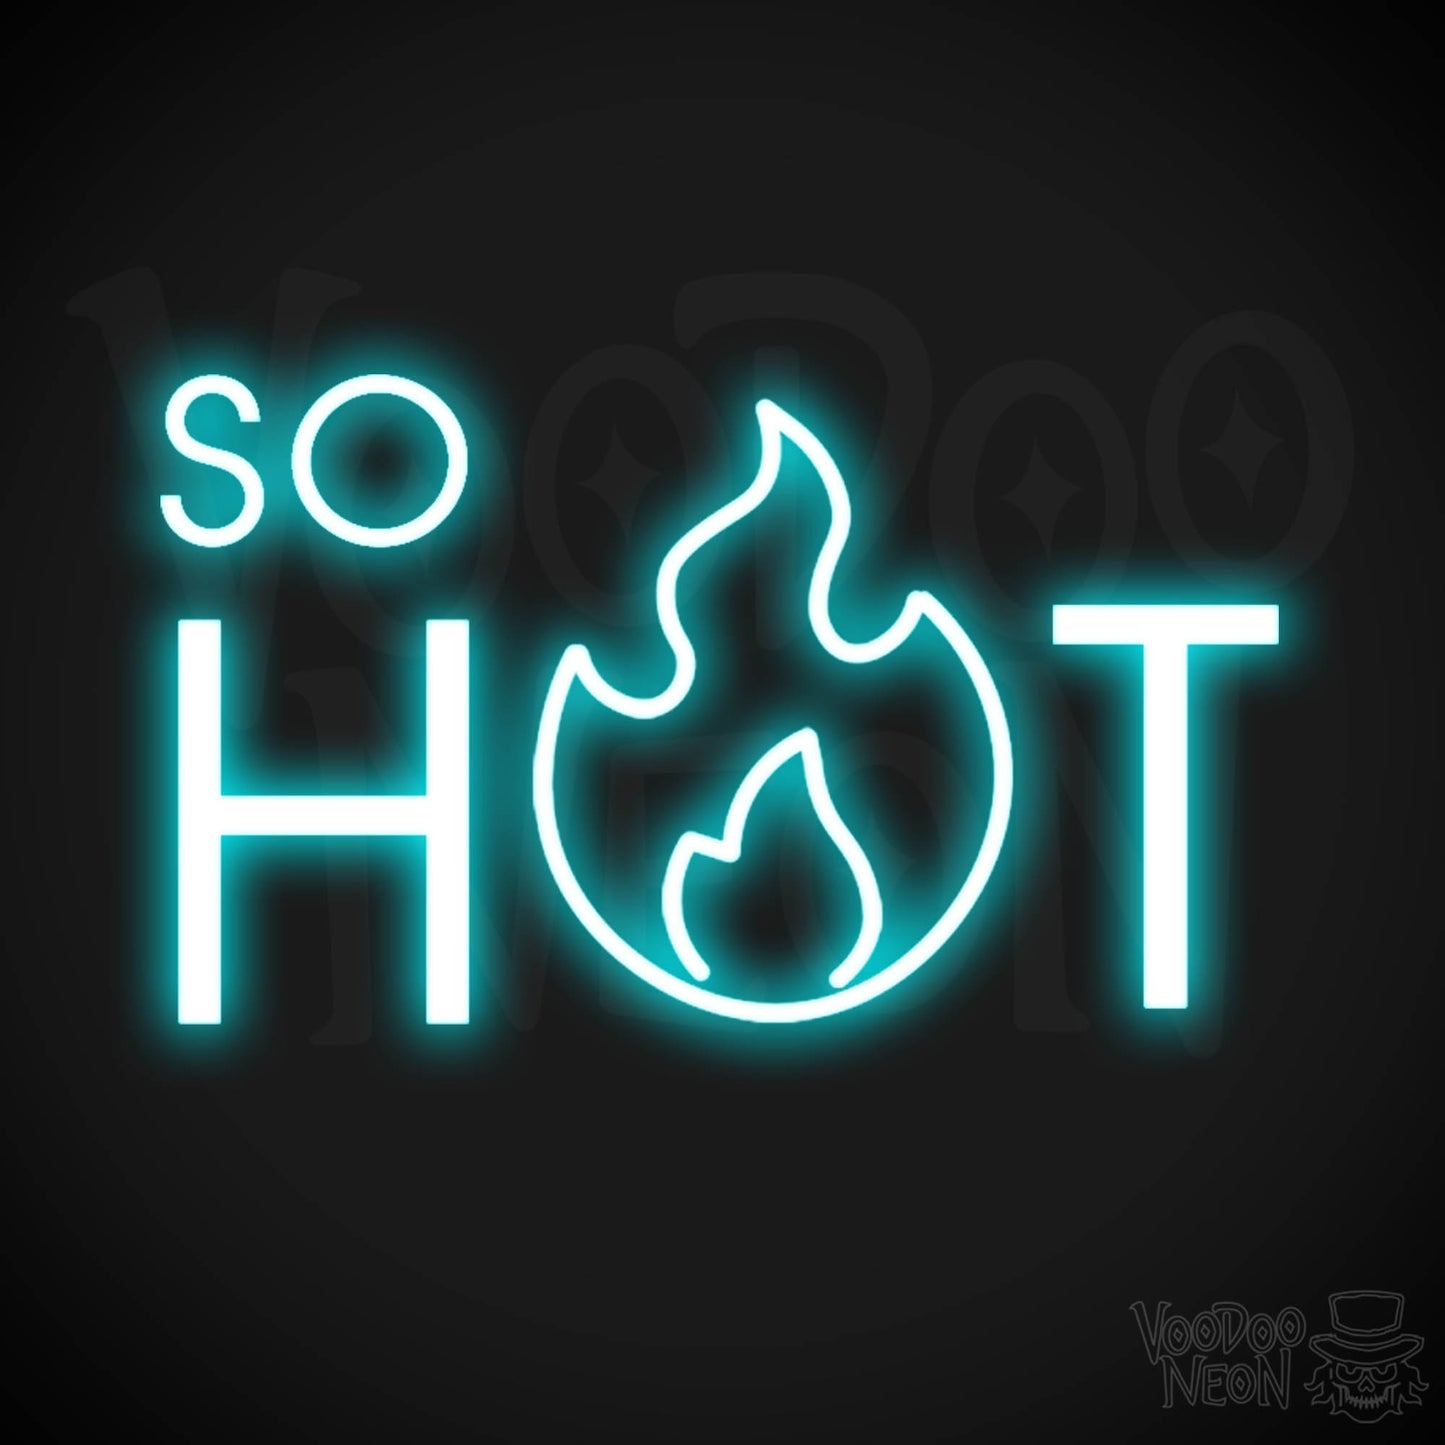 So Hot Neon Sign - Neon So Hot Sign - LED Neon Wall Art - Color Ice Blue